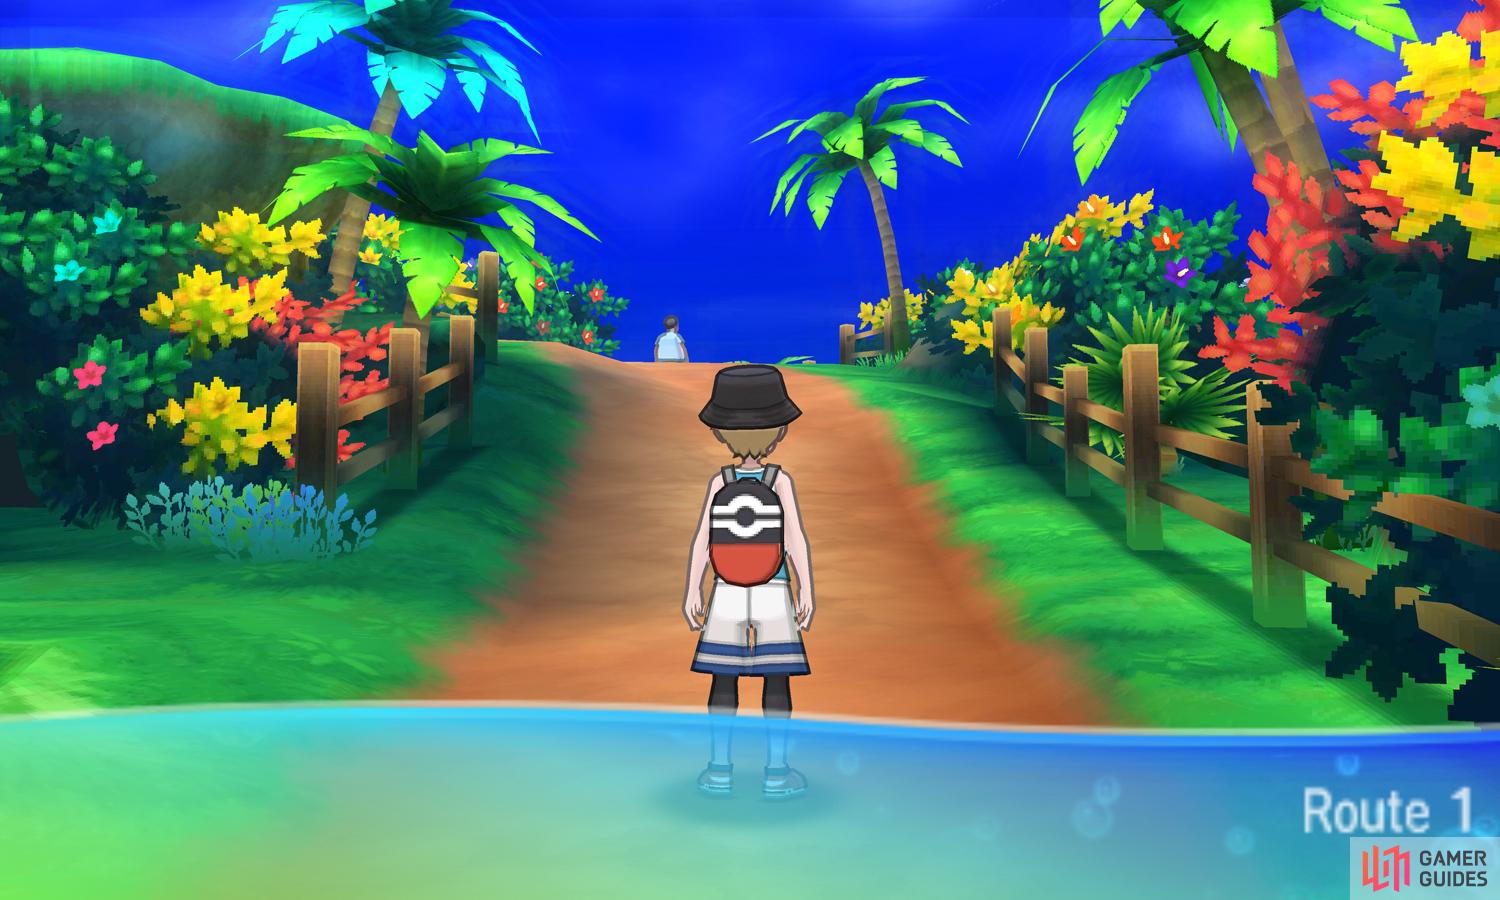 What's the difference between Pokémon Ultra Sun and Ultra Moon? - Polygon